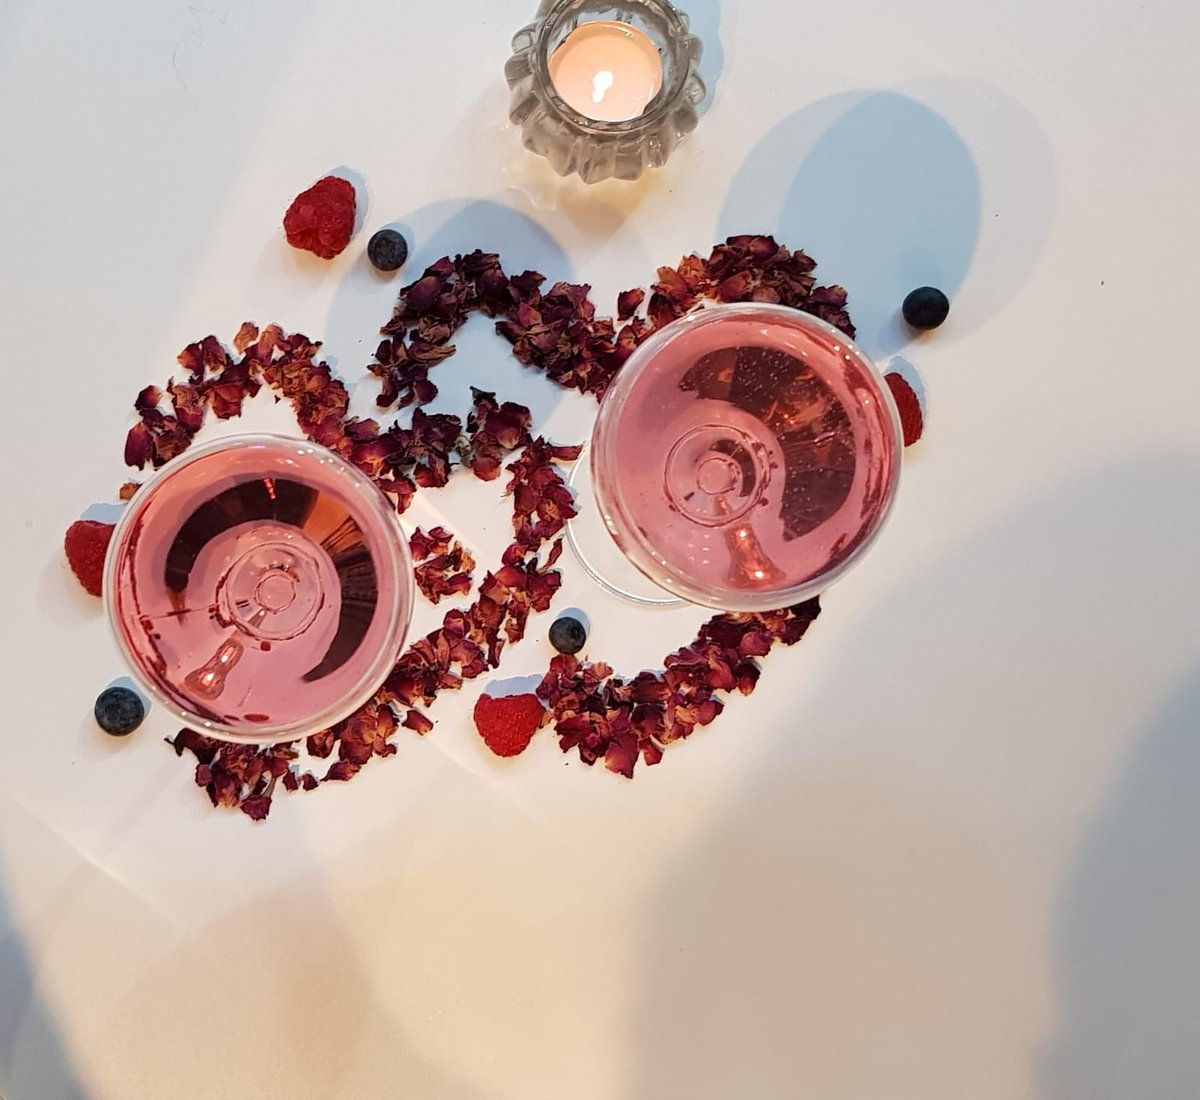 VALENTINE’S DAY // Join us with your val or pal this Thursday 14th February for an indulgent 4 course dinner, perfectly paired with delectable wine from our organic selection. Bookings between 7-8pm // £35pp // email info@onefinedayliverpool.co.uk to book your place.